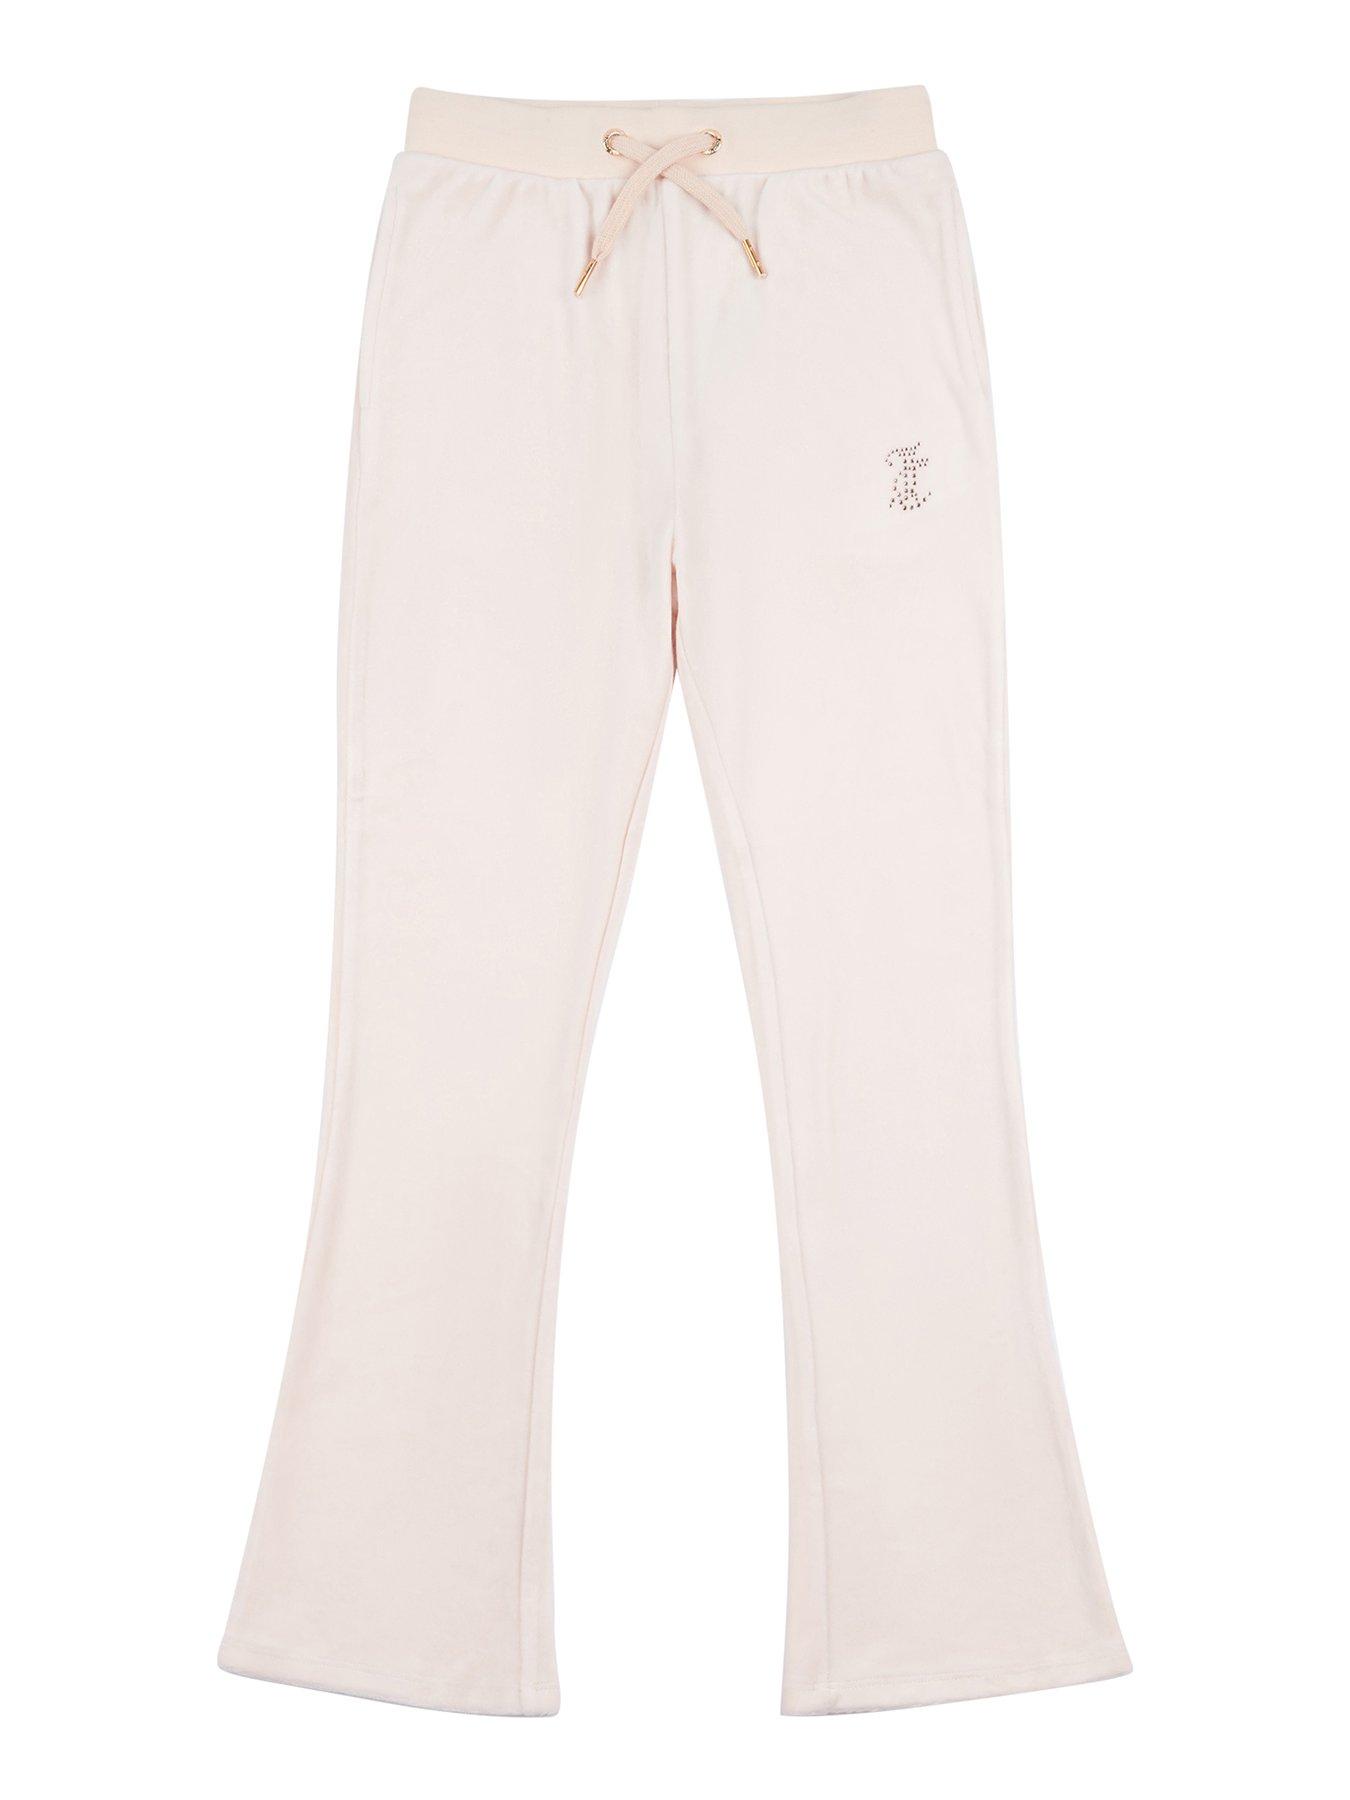 Juicy Couture Girls Diamante Velour Bootcut Jogger - Almond Blossom